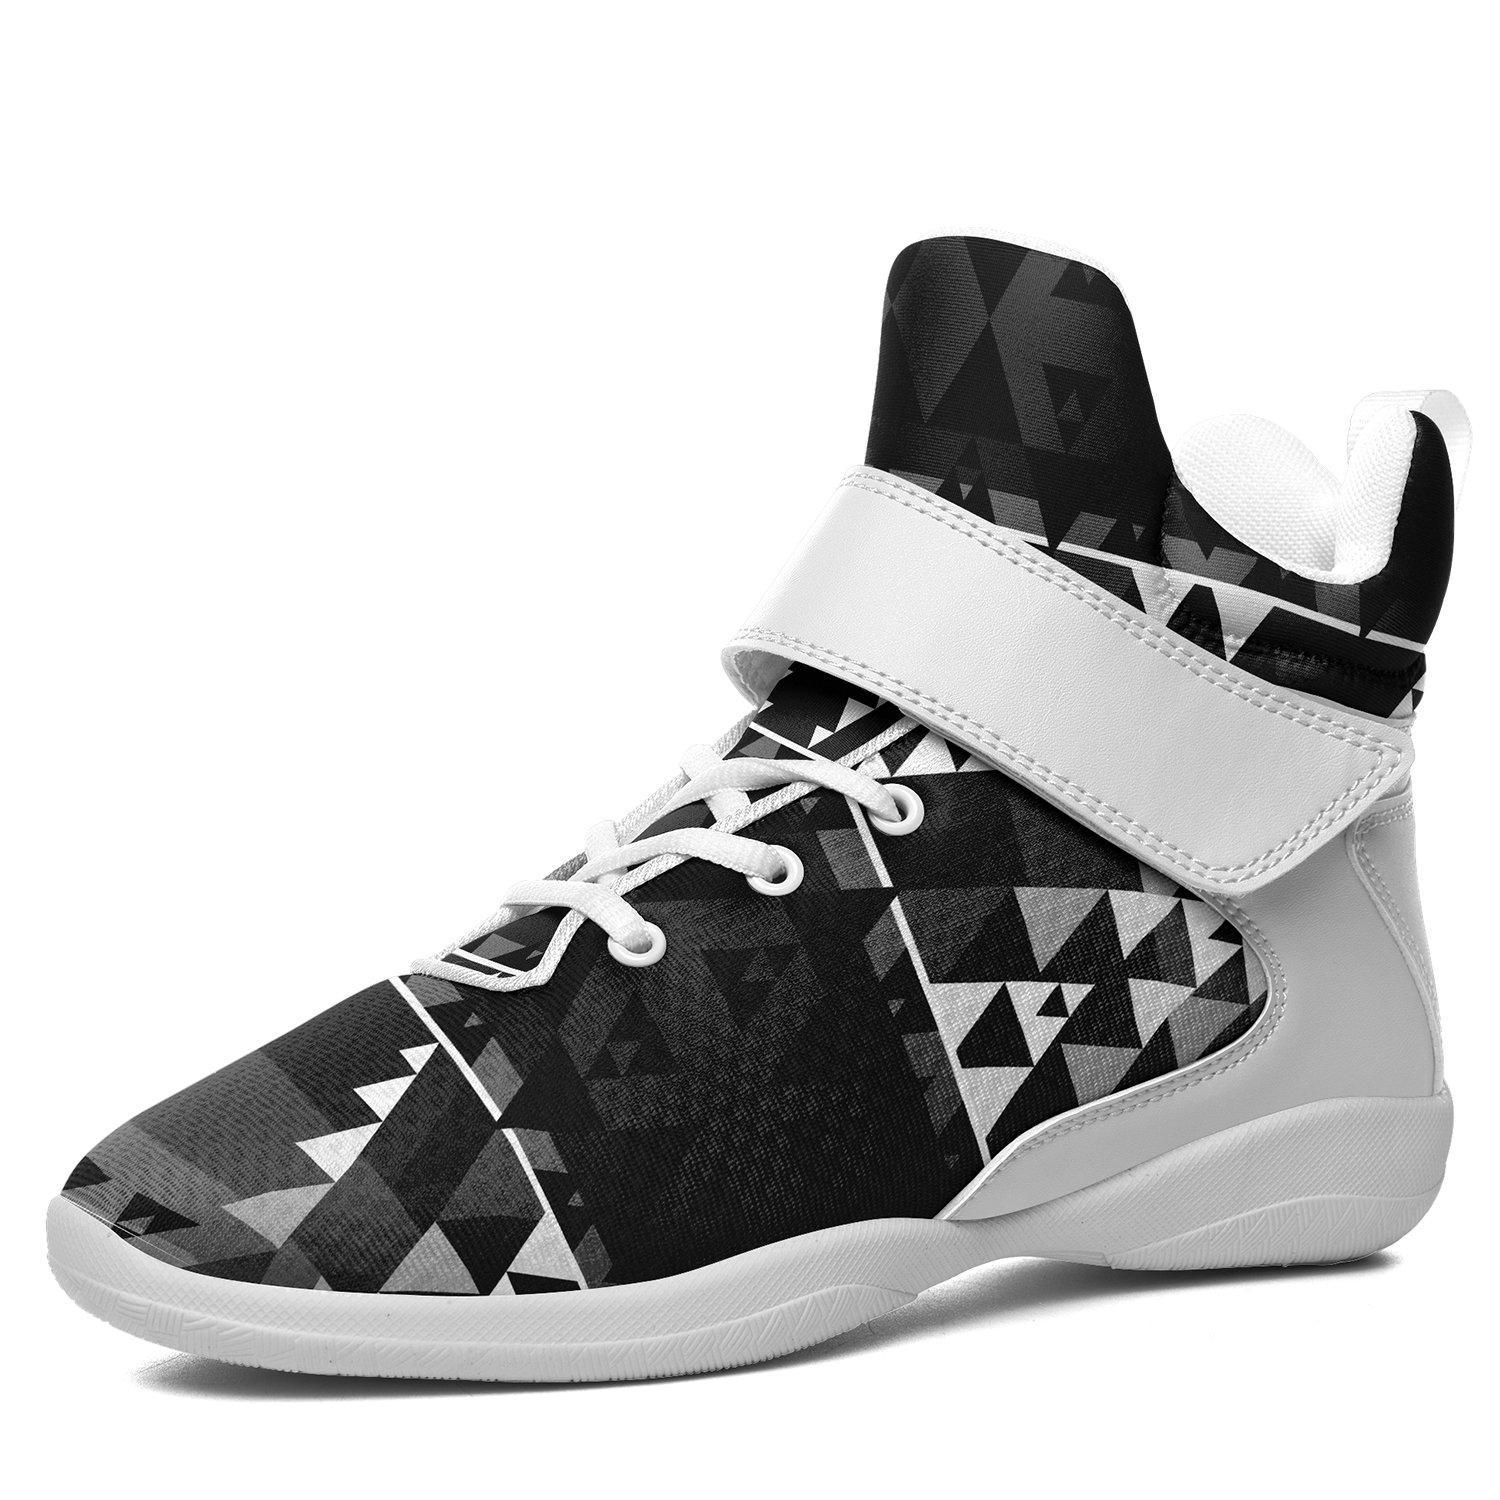 Writing on Stone Black and White Kid's Ipottaa Basketball / Sport High Top Shoes 49 Dzine US Child 12.5 / EUR 30 White Sole with White Strap 